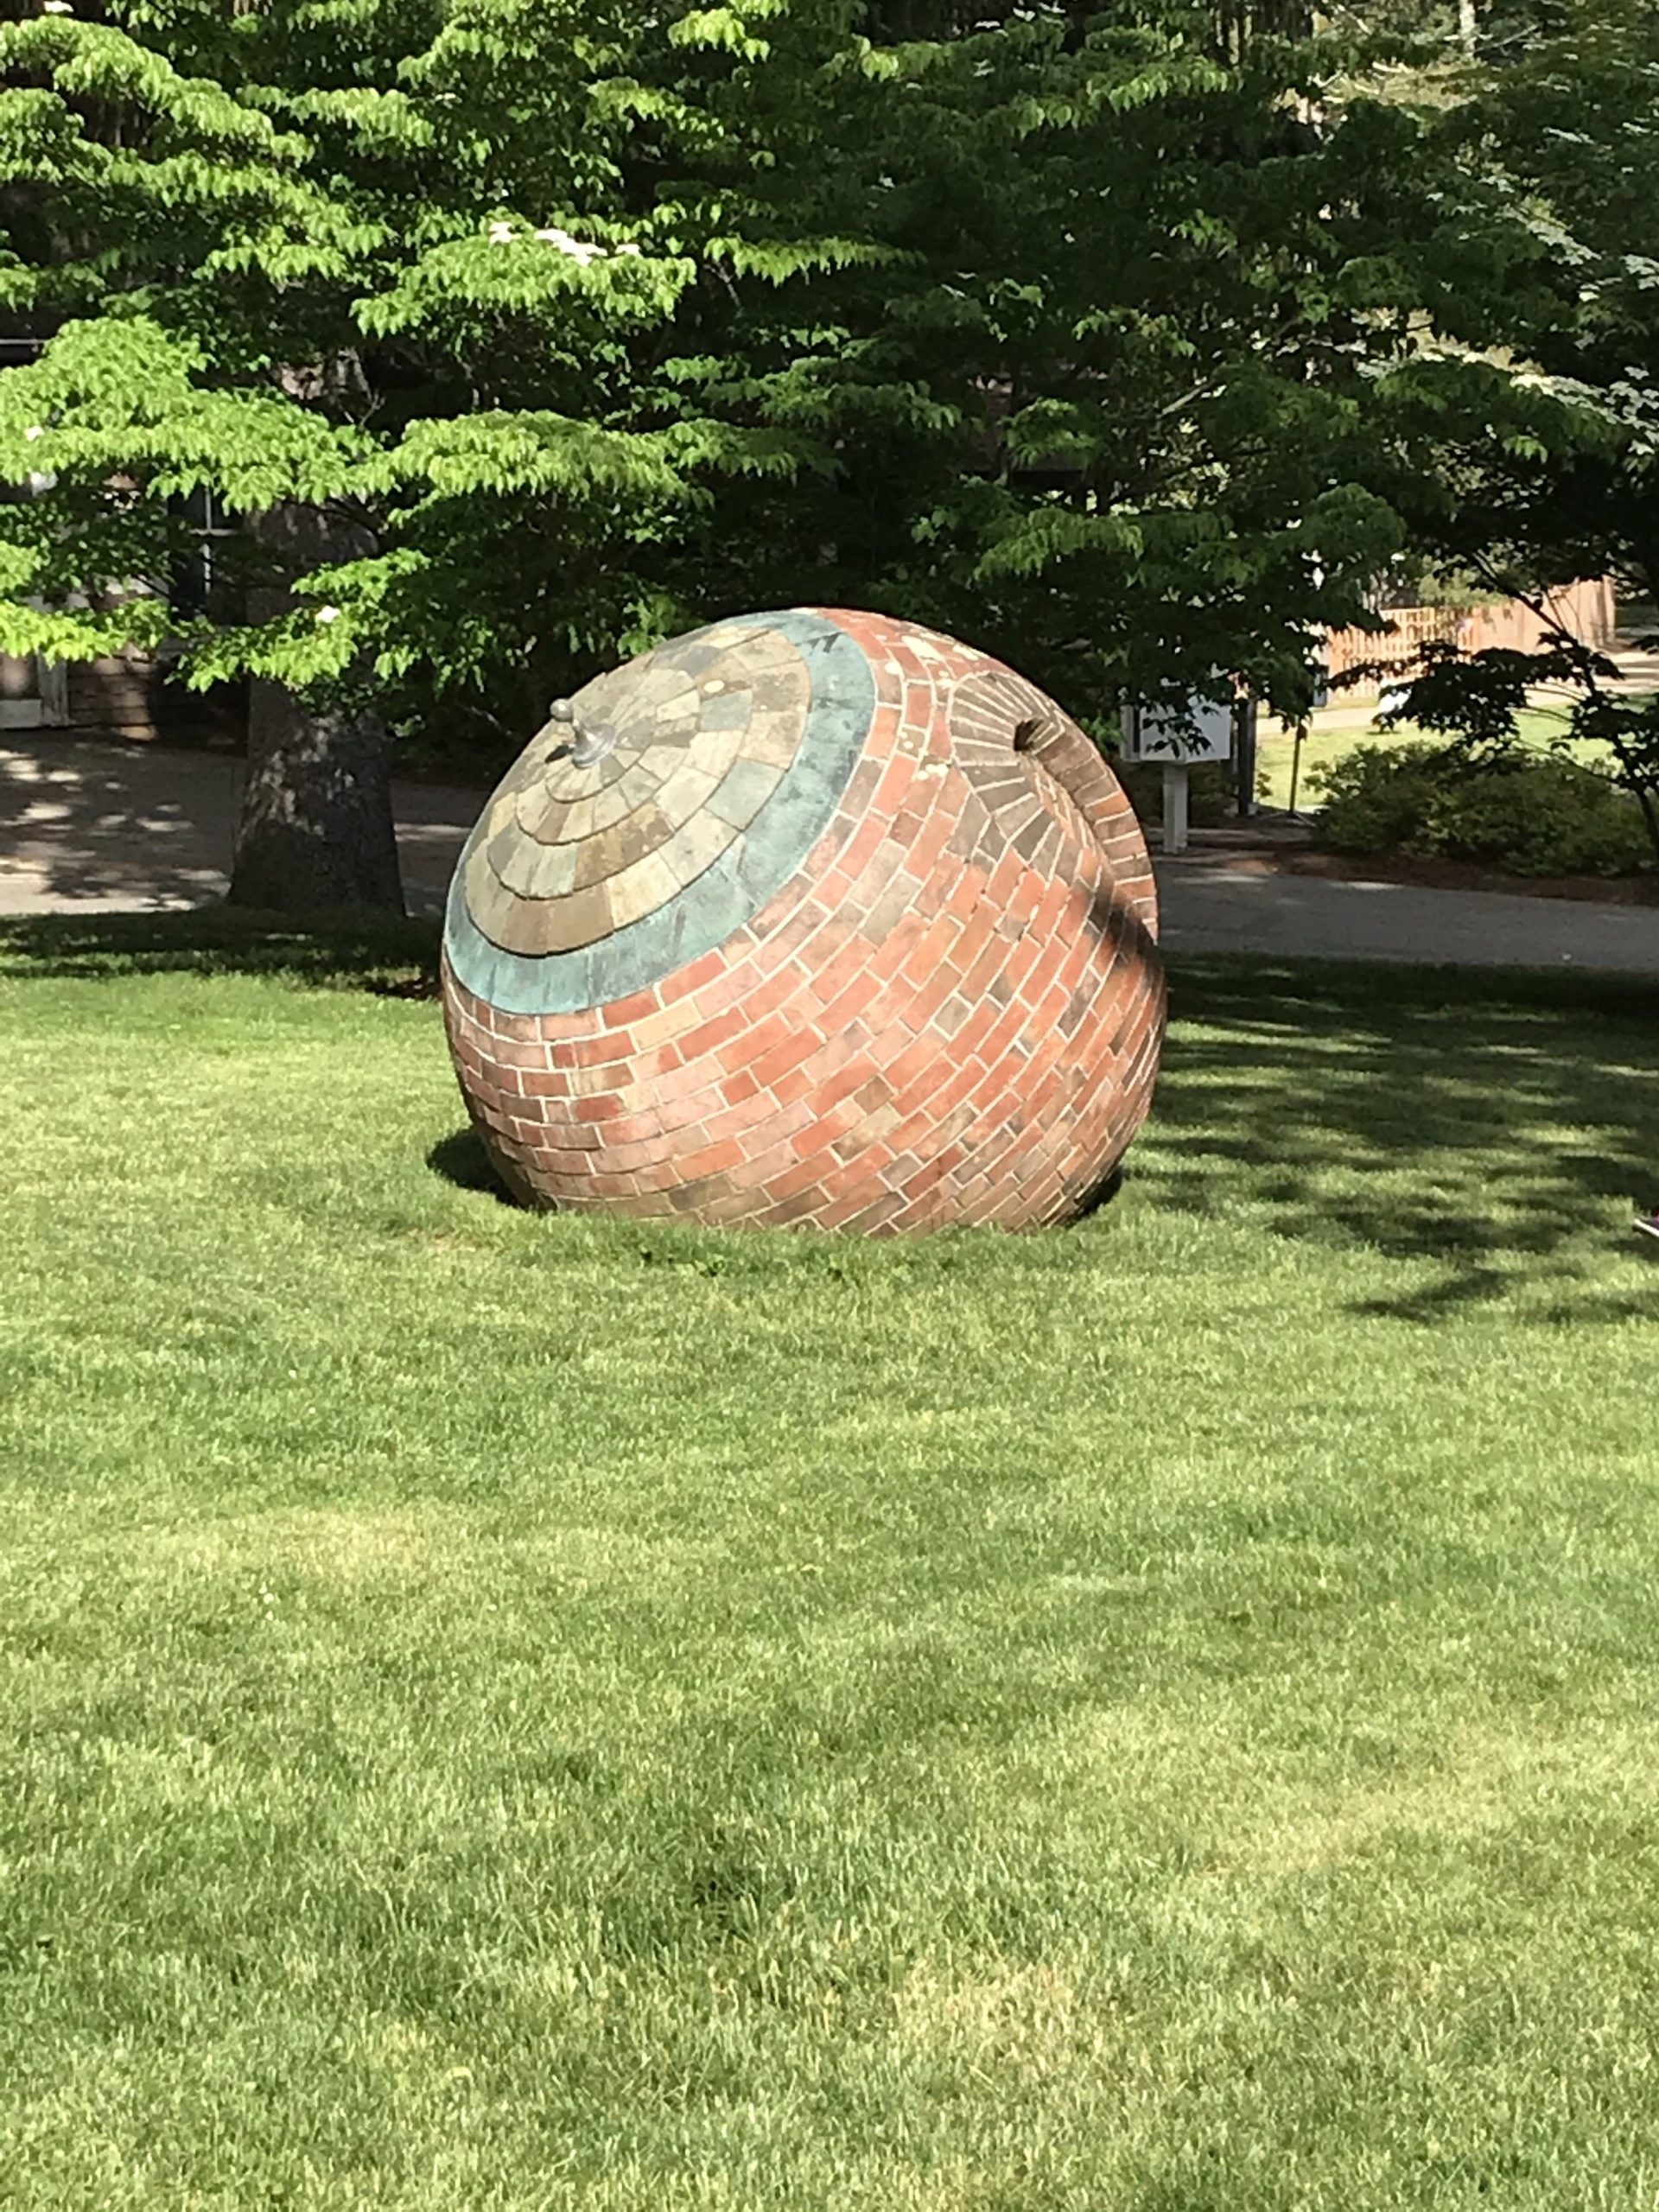 deCordova Sculpture Museum grounds with the kids-they thought it was so cool!